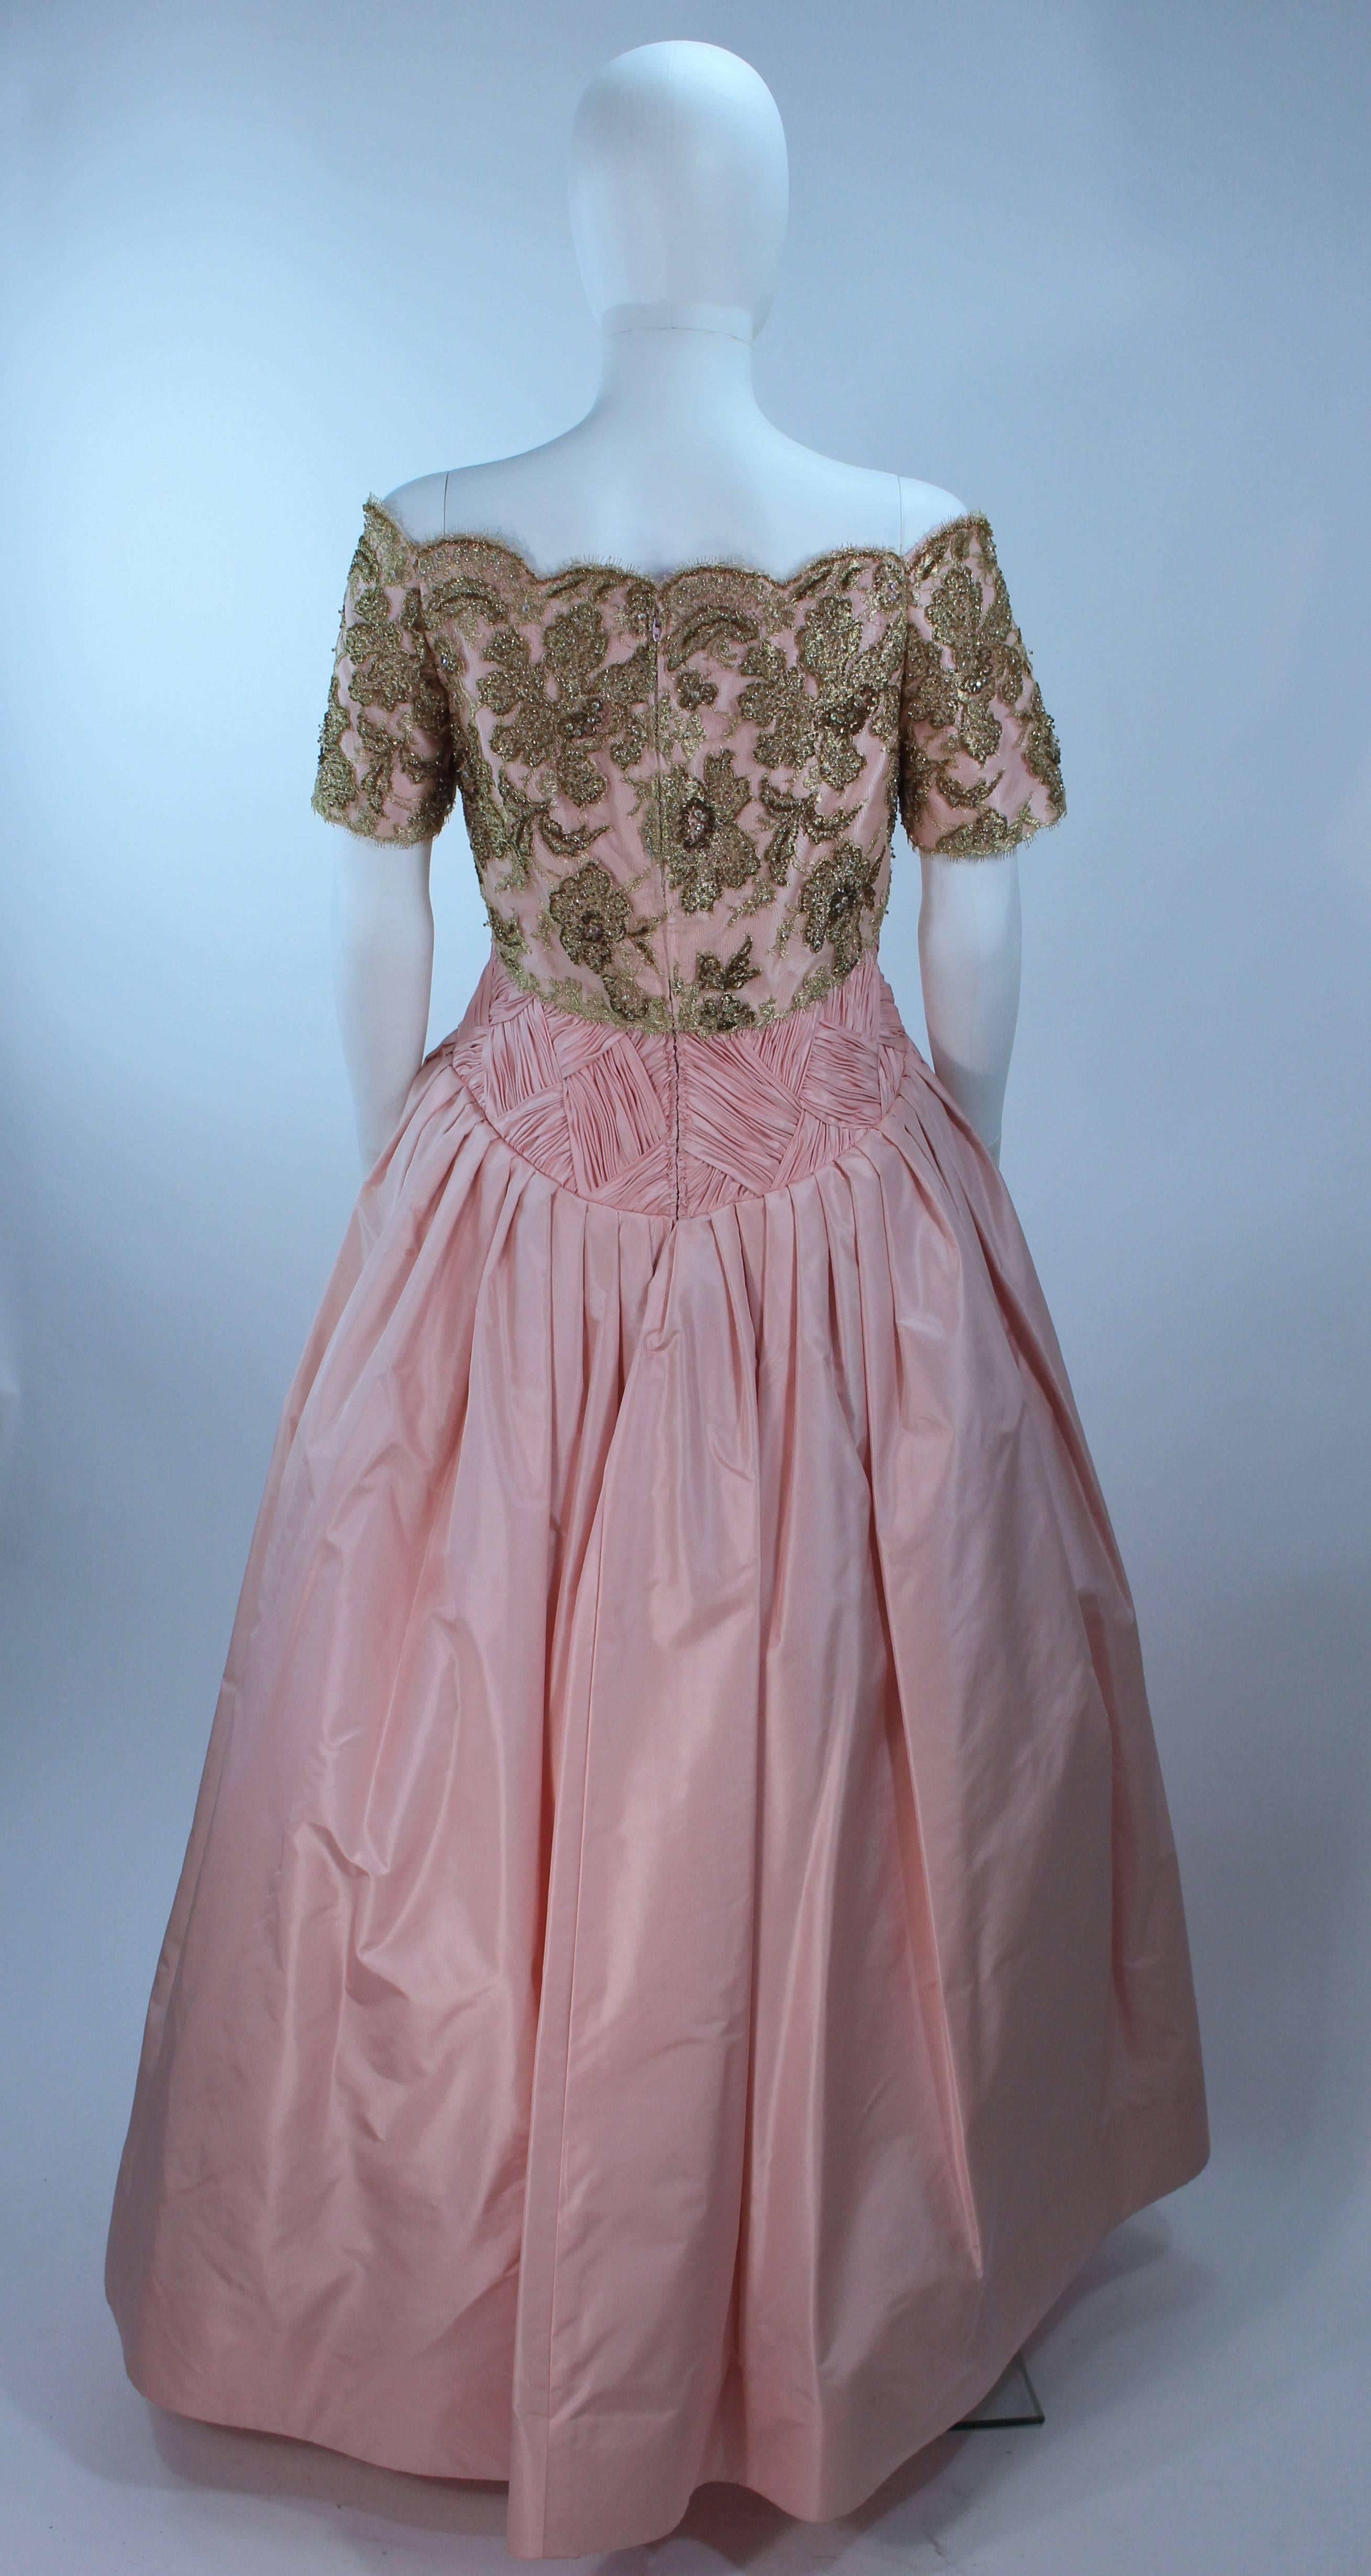 VERA WANG 1980's Embellished Pink Silk Ball Gown with Gold Lace Size 10-12 For Sale 1